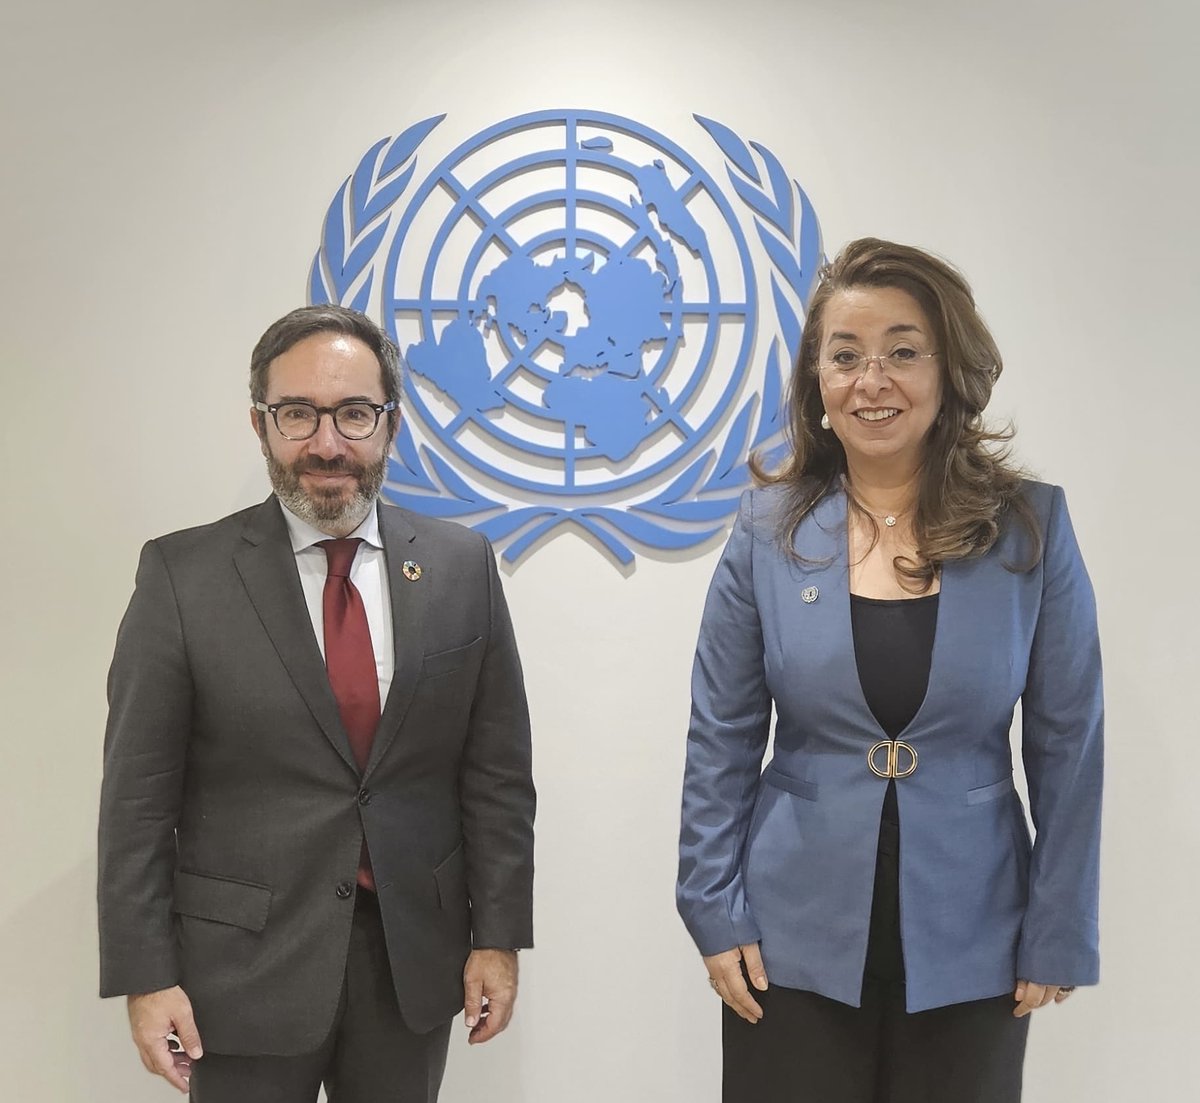 In Vienna, I had discussions with @GhadaFathiWaly, focusing on how @UNOPS and @UNODC can enhance our collaboration for #SDG delivery. From crisis response to climate action, we are aligned in our mission to drive global impact.